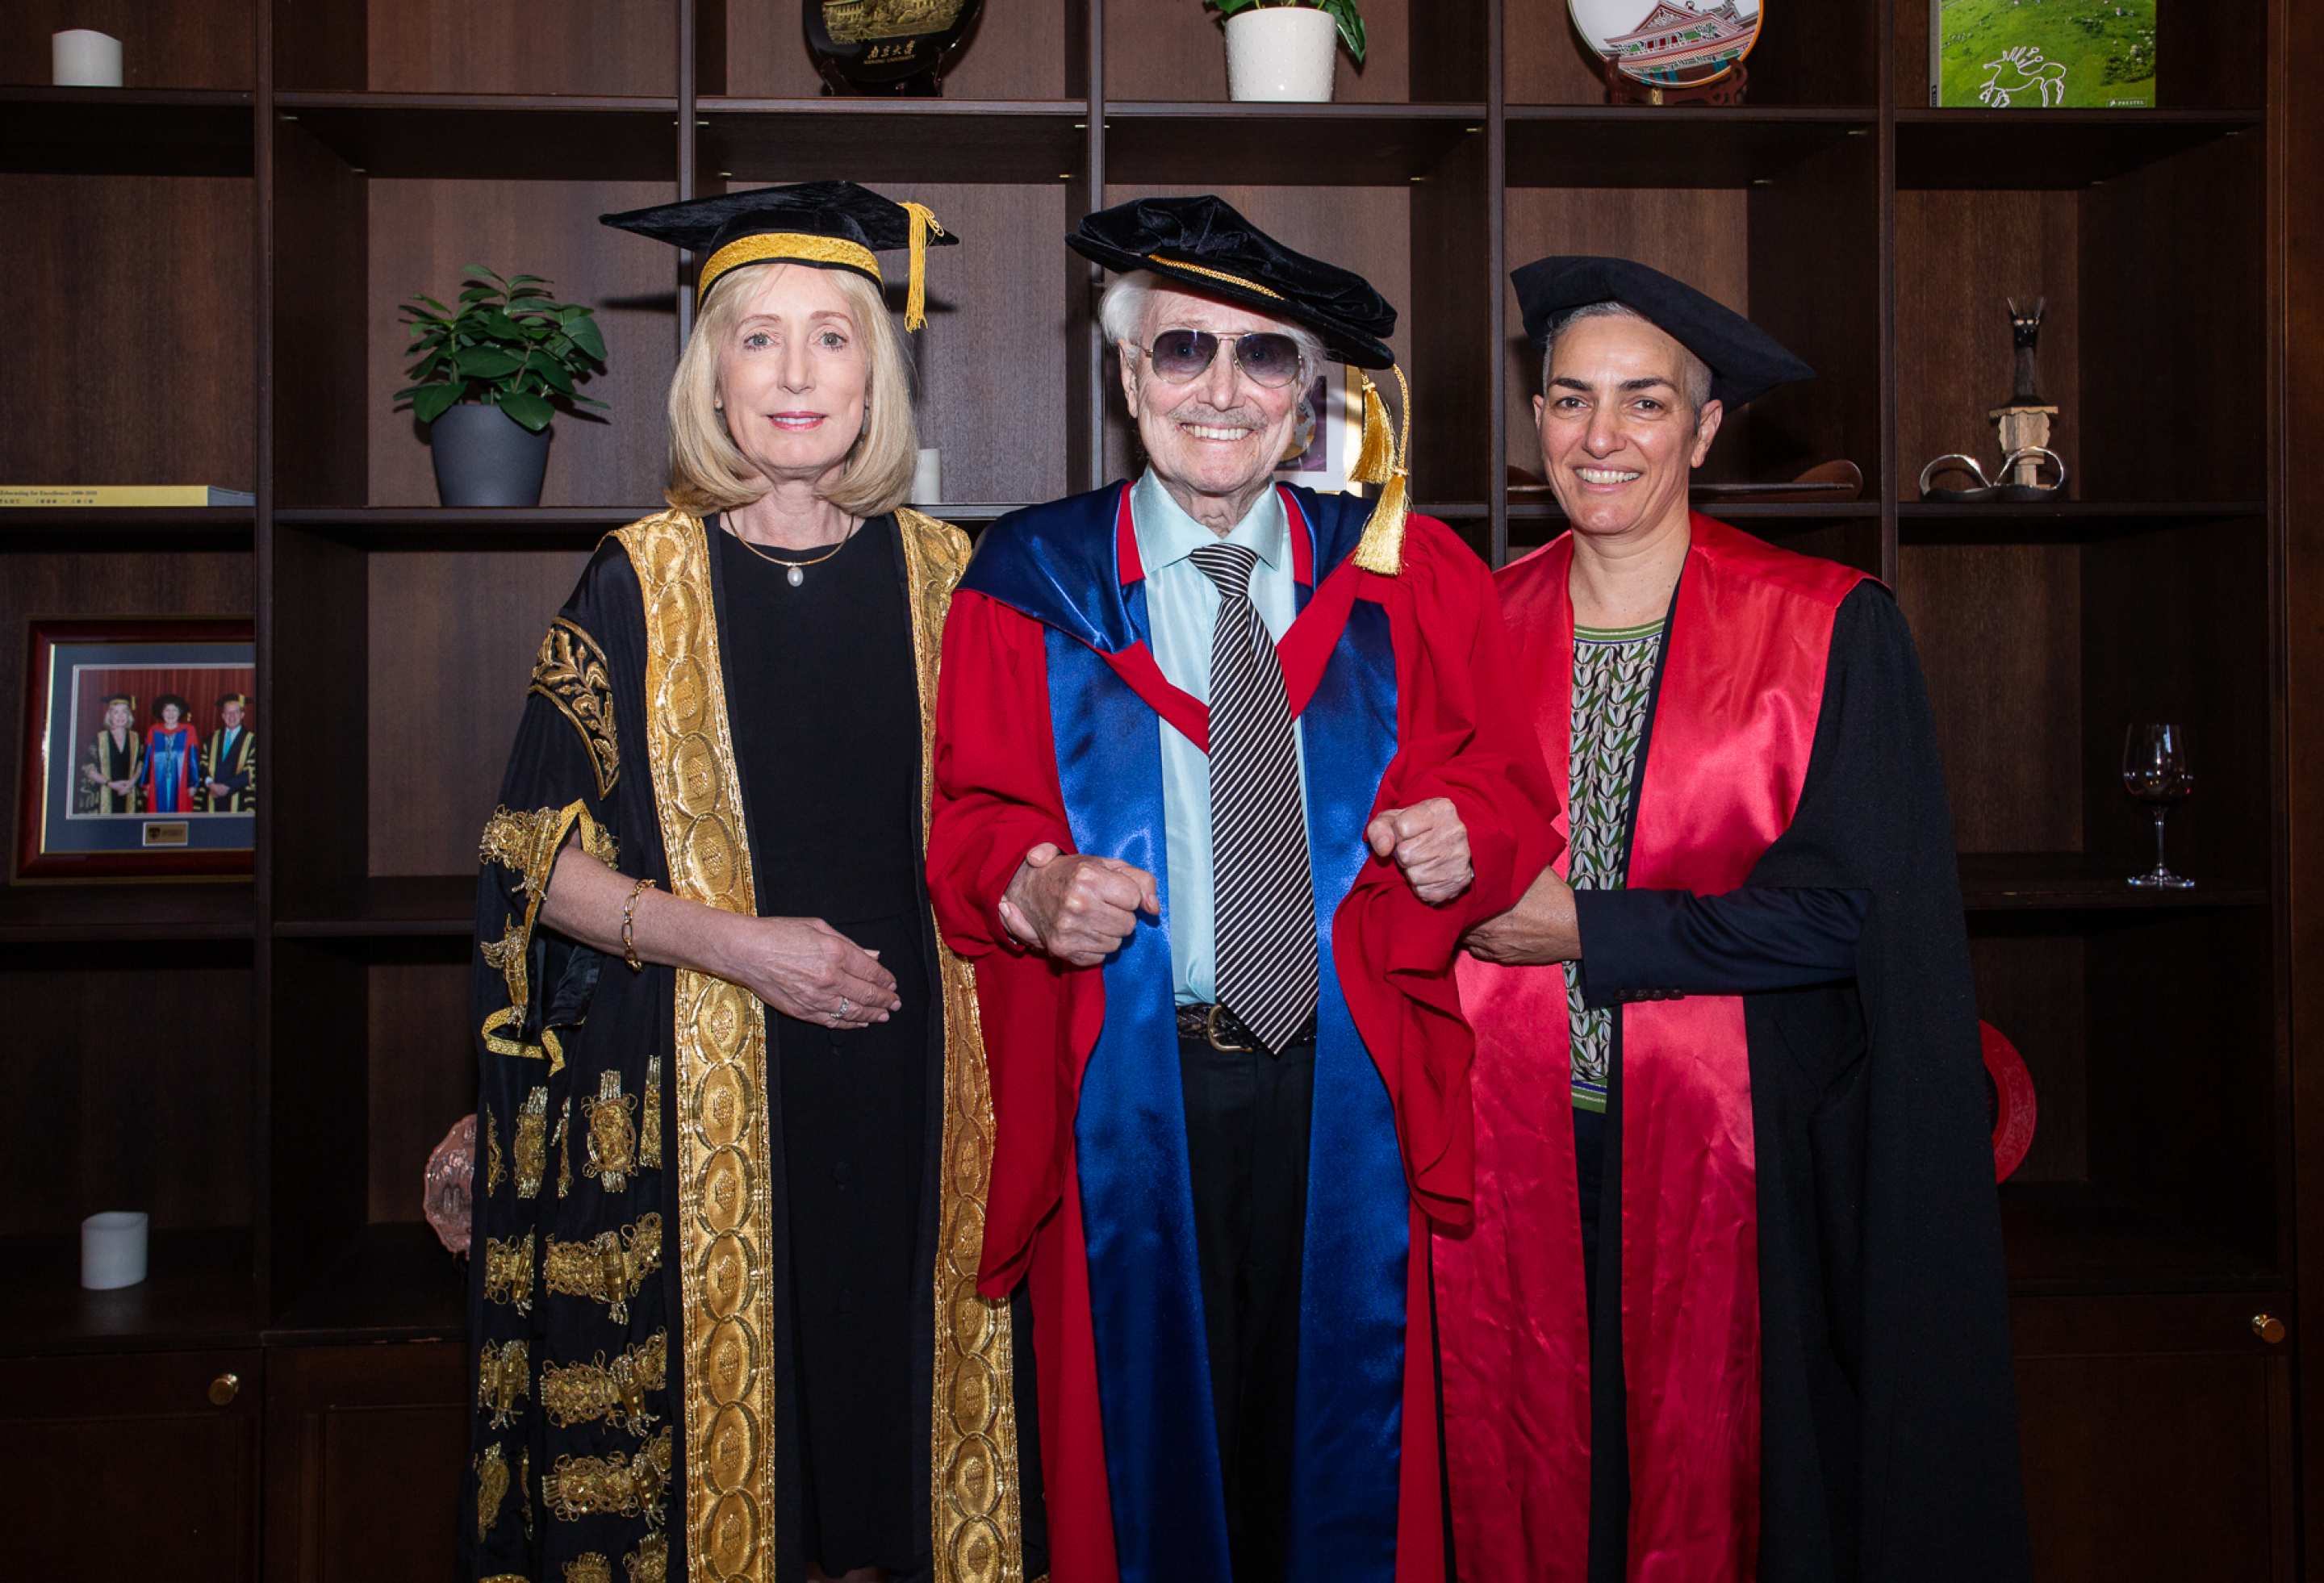 L-R: University of Sydney Chancellor Belinda Hutchinson AC, Nelson Meers AO, and Dean of the Faculty of Arts and Social Sciences, Professor Annamarie Jagose